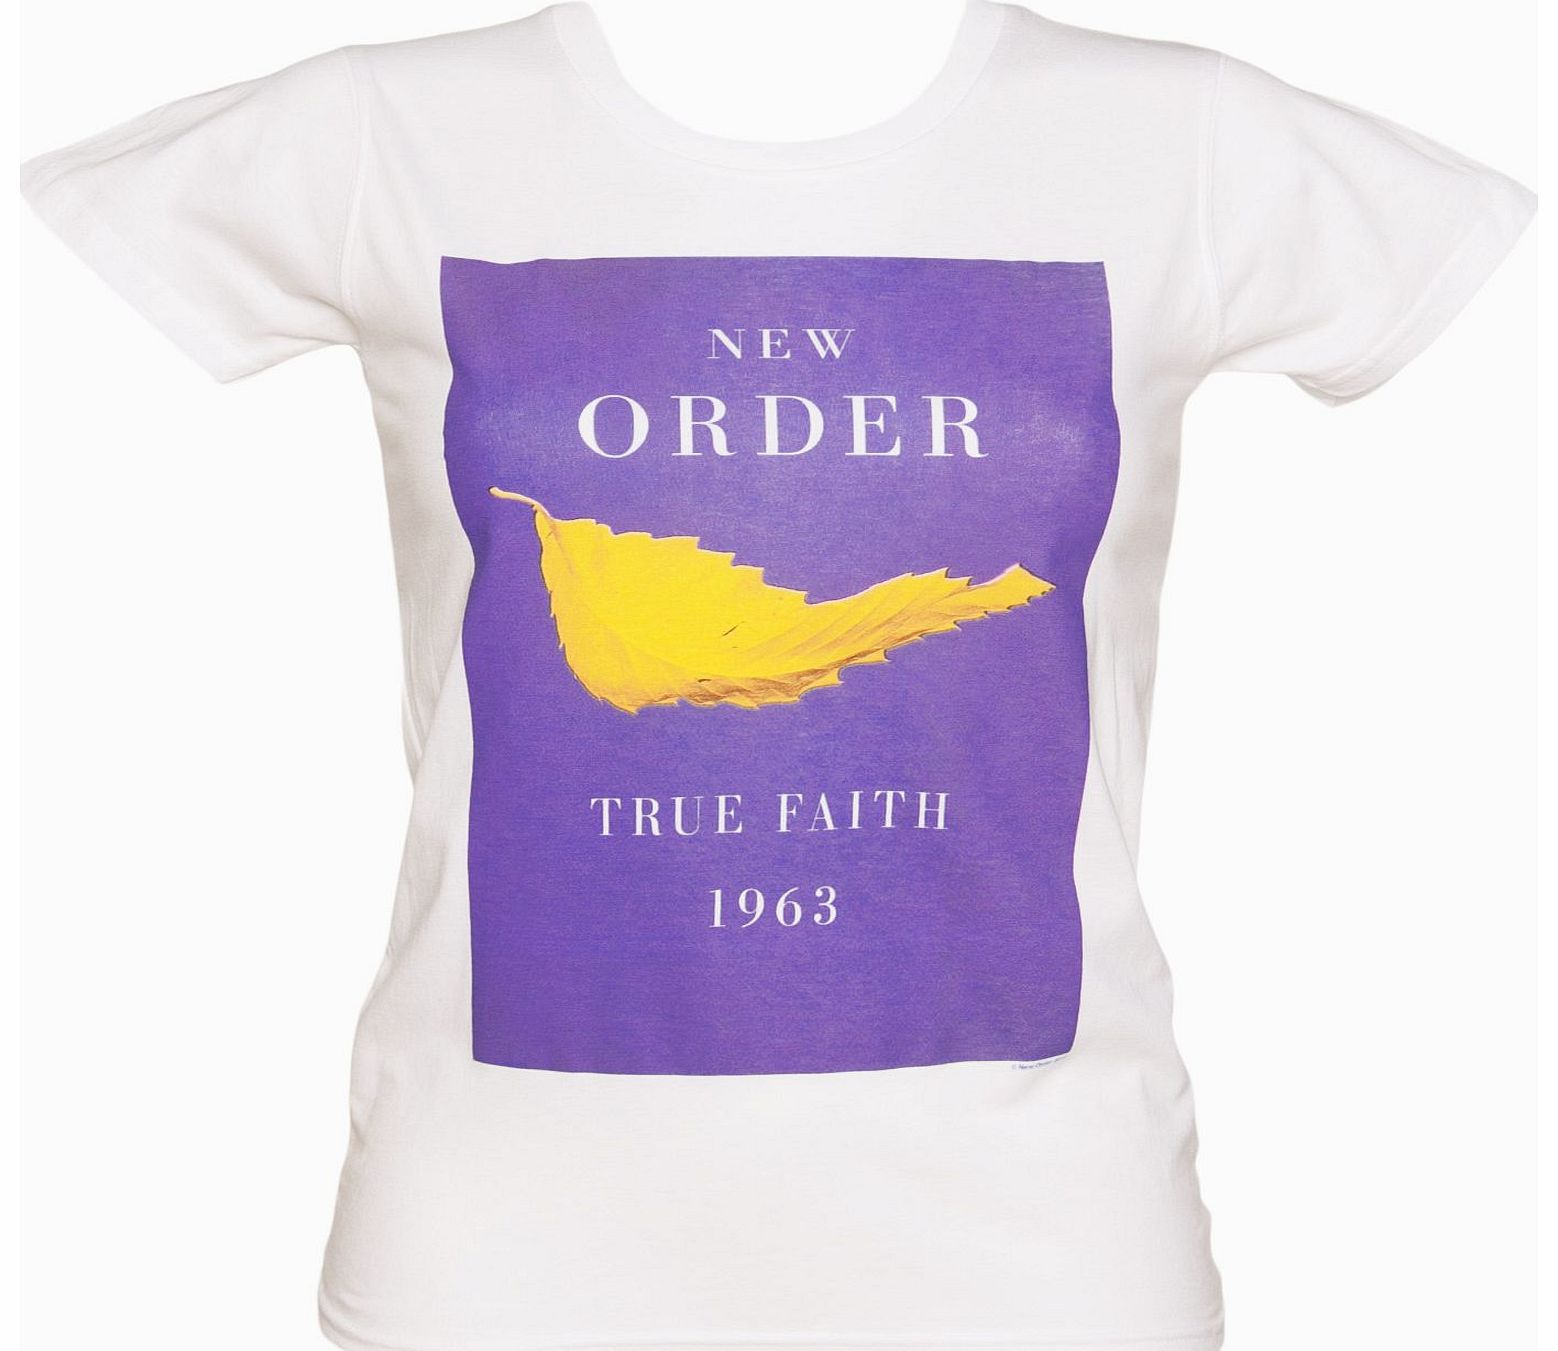 Ladies White New Order True Faith T-Shirt from